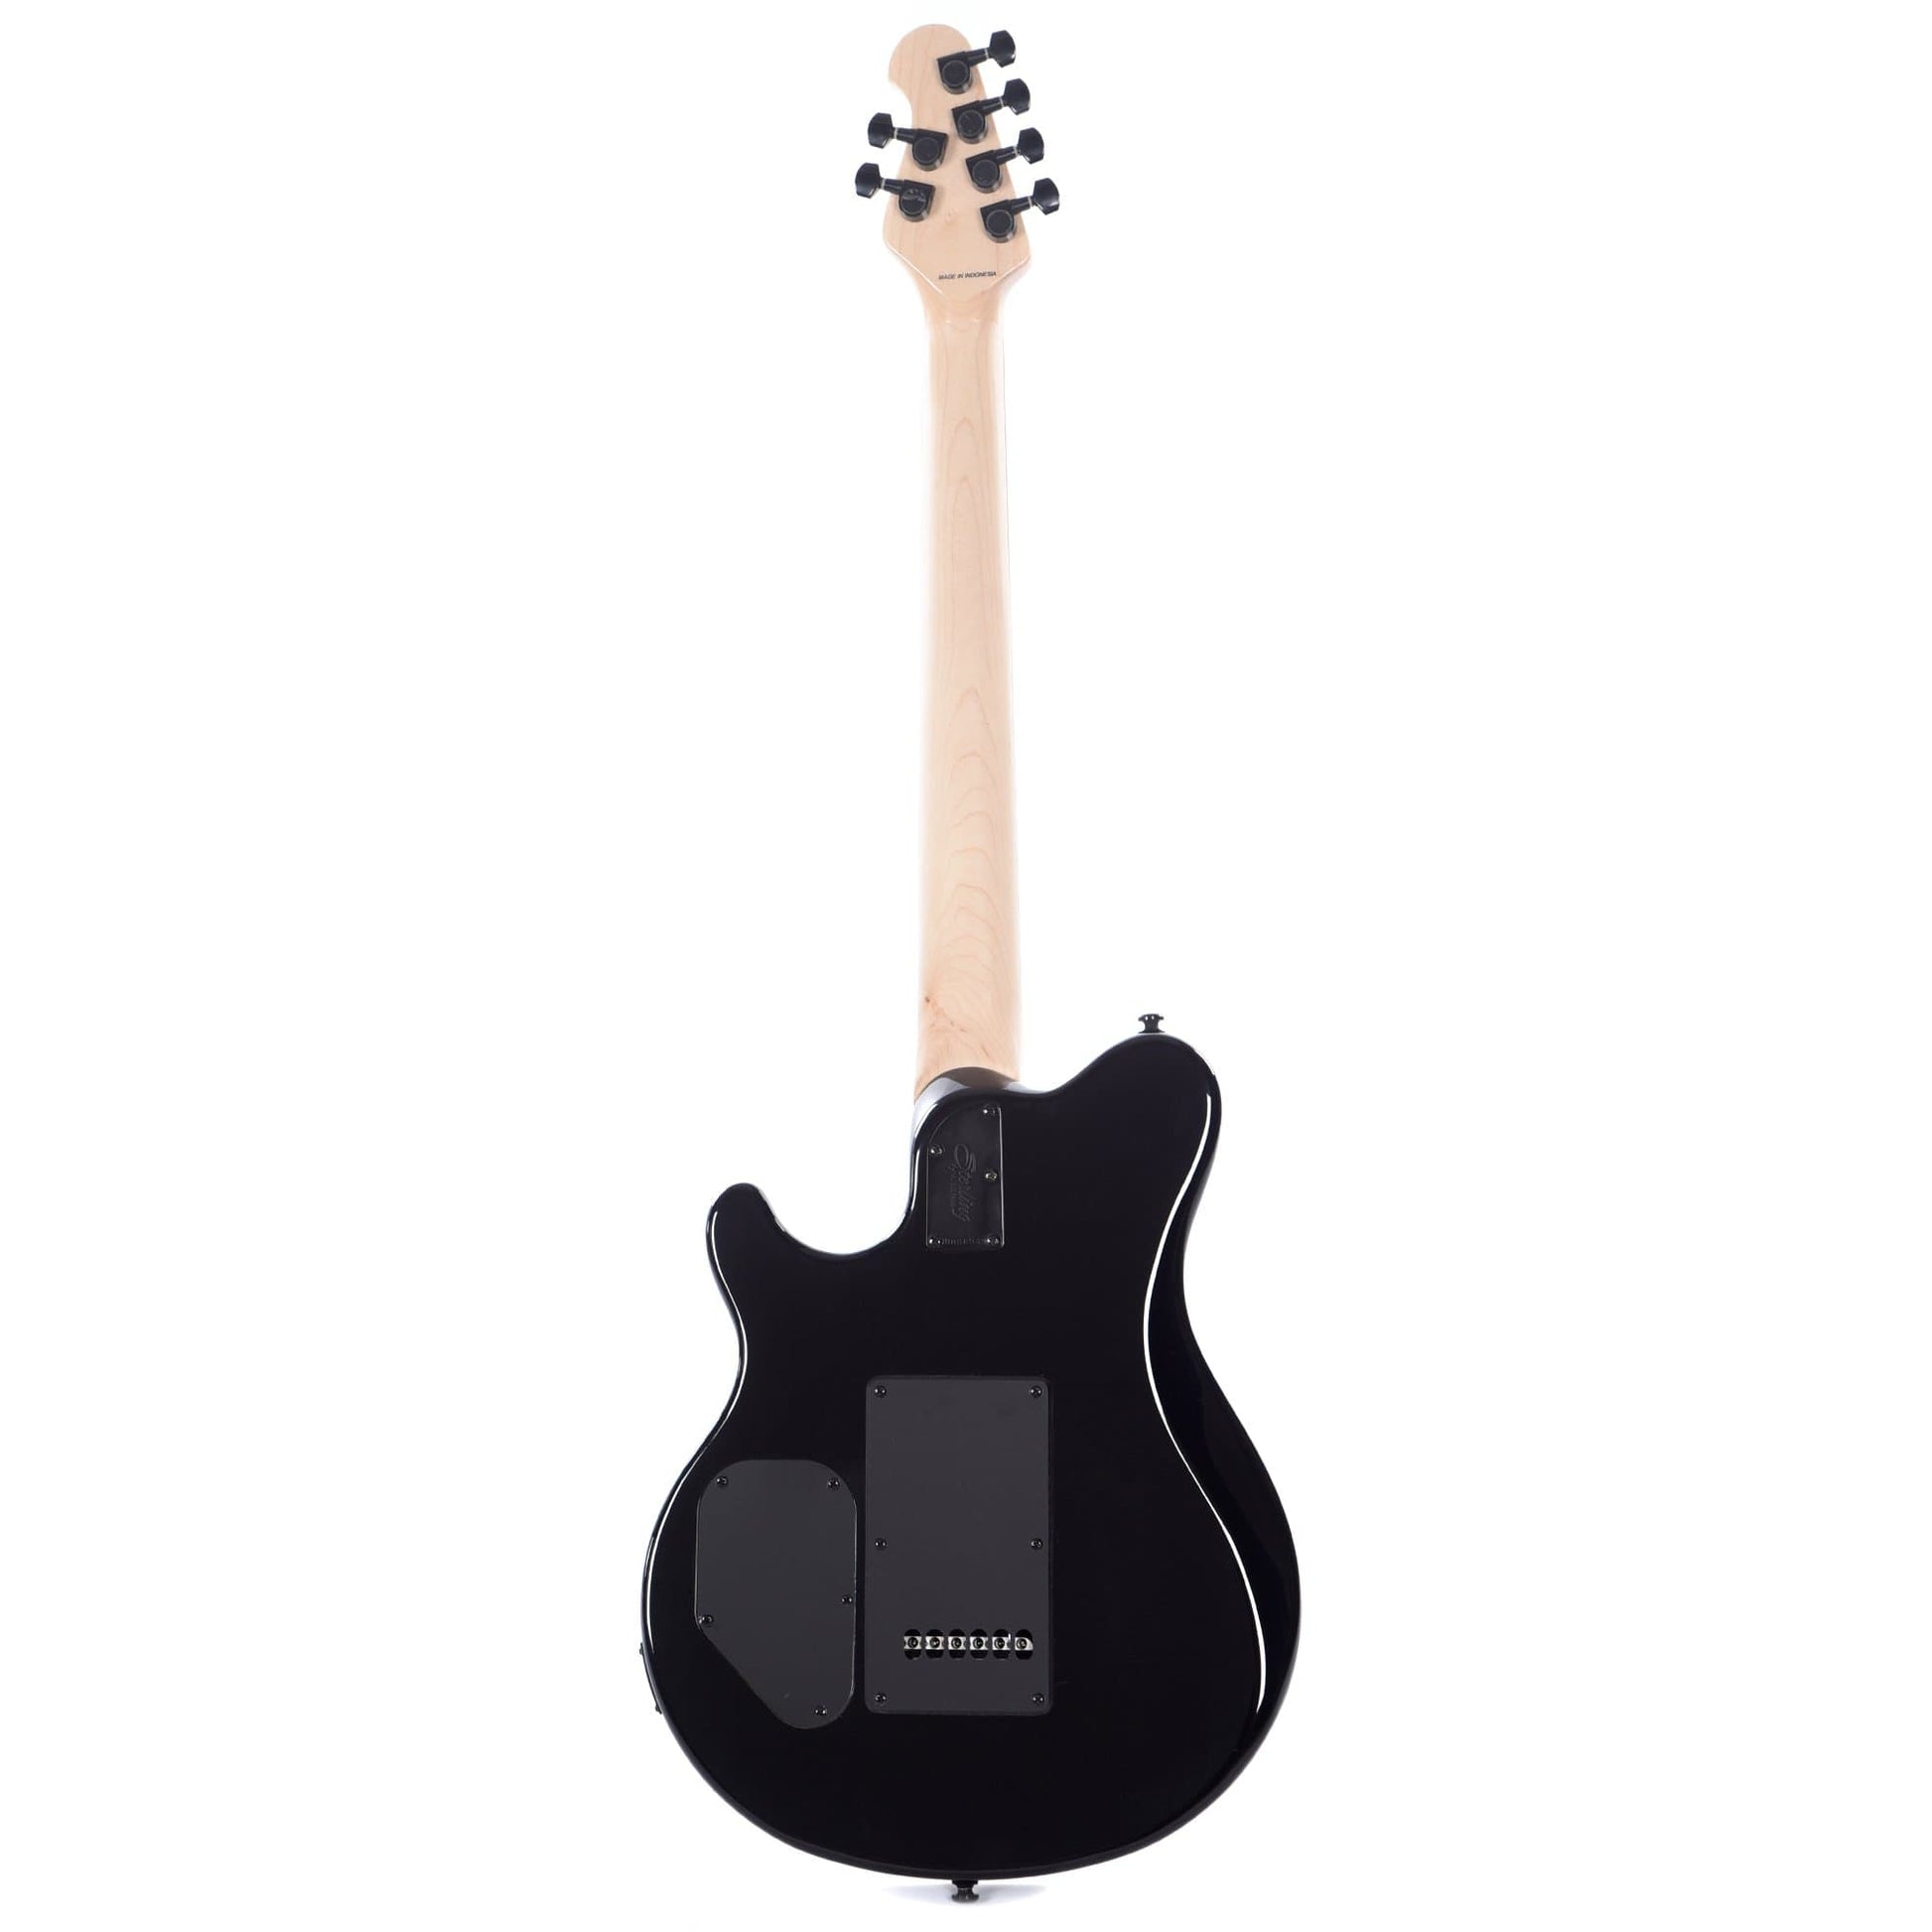 Sterling by Music Man S.U.B. Series Axis Black with White Body Binding w/Guitar Stand, Tuner and 10' Cable Bundle Electric Guitars / Solid Body